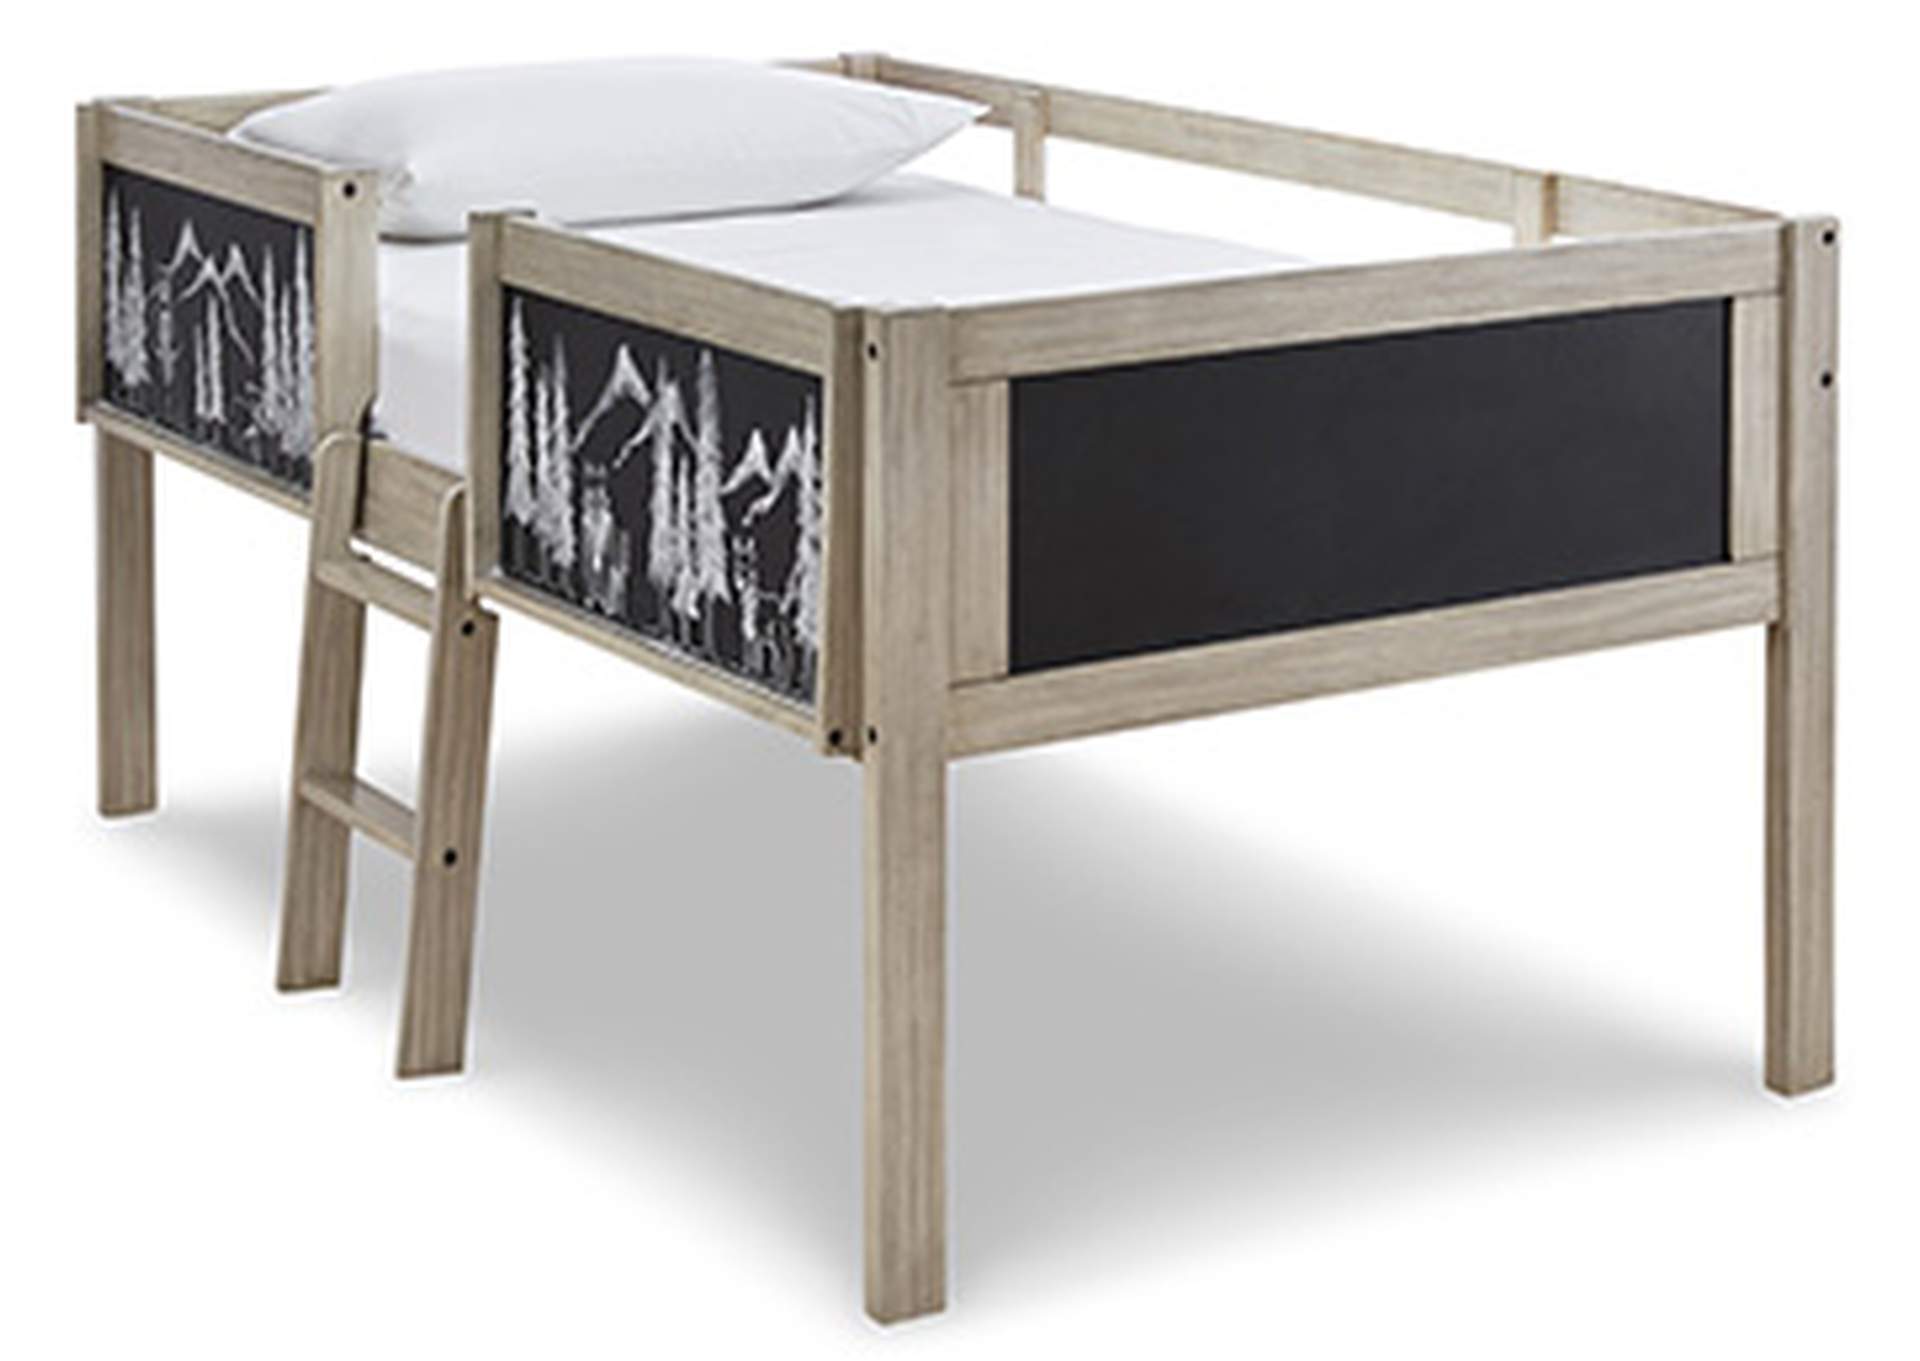 Wrenalyn Twin Loft Bed Frame,Signature Design By Ashley